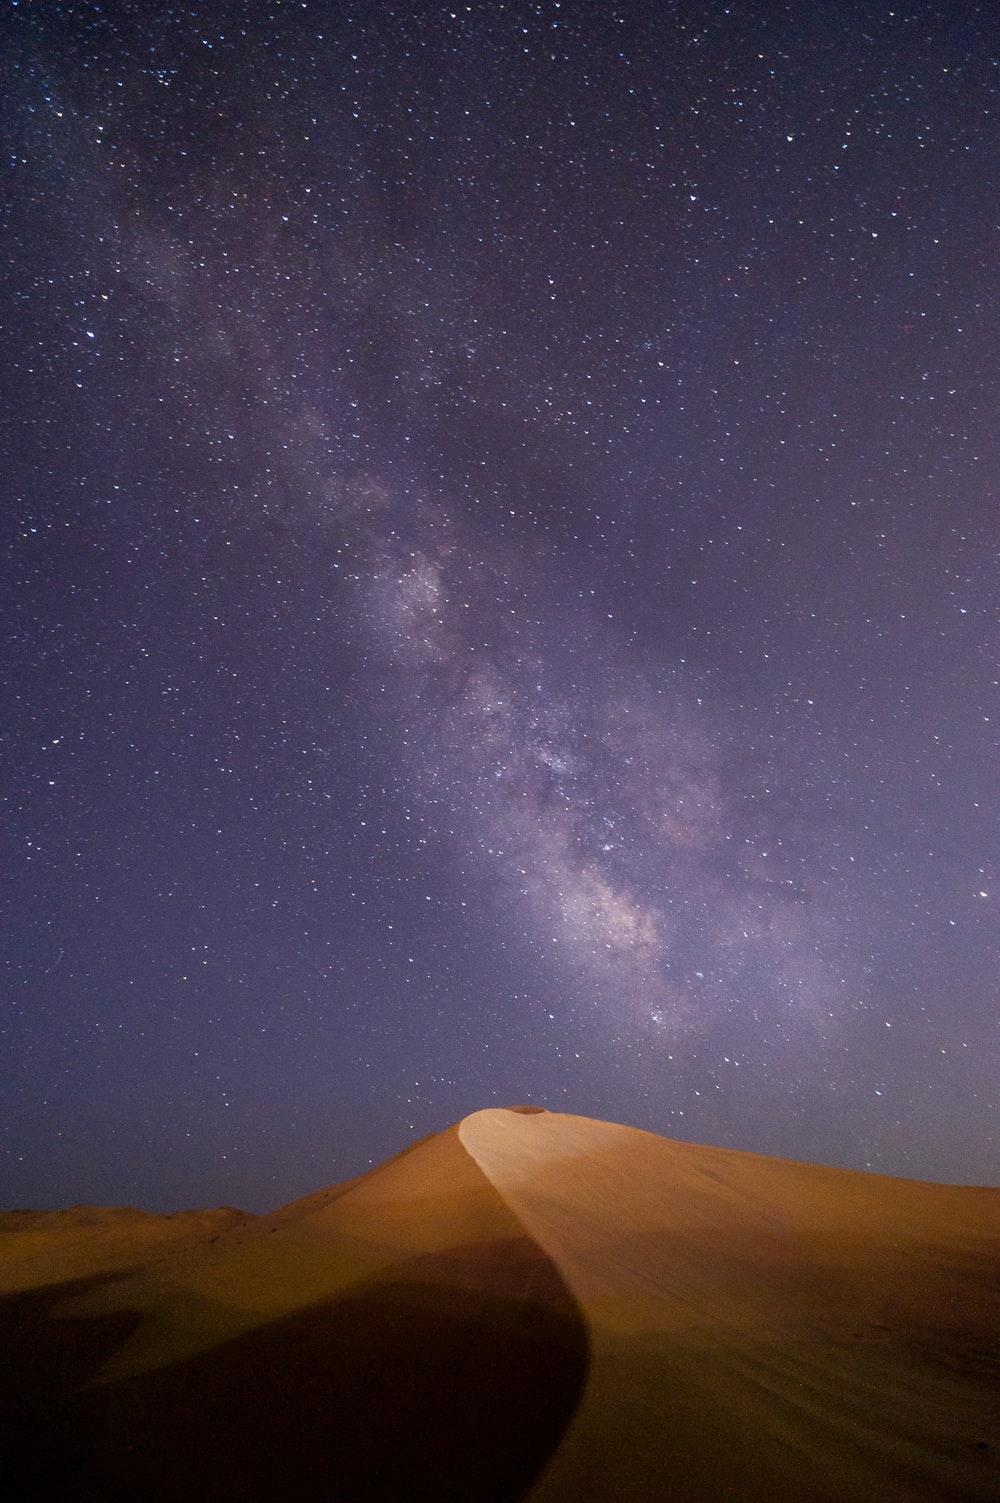 Desert Night Picture. Download Free Image